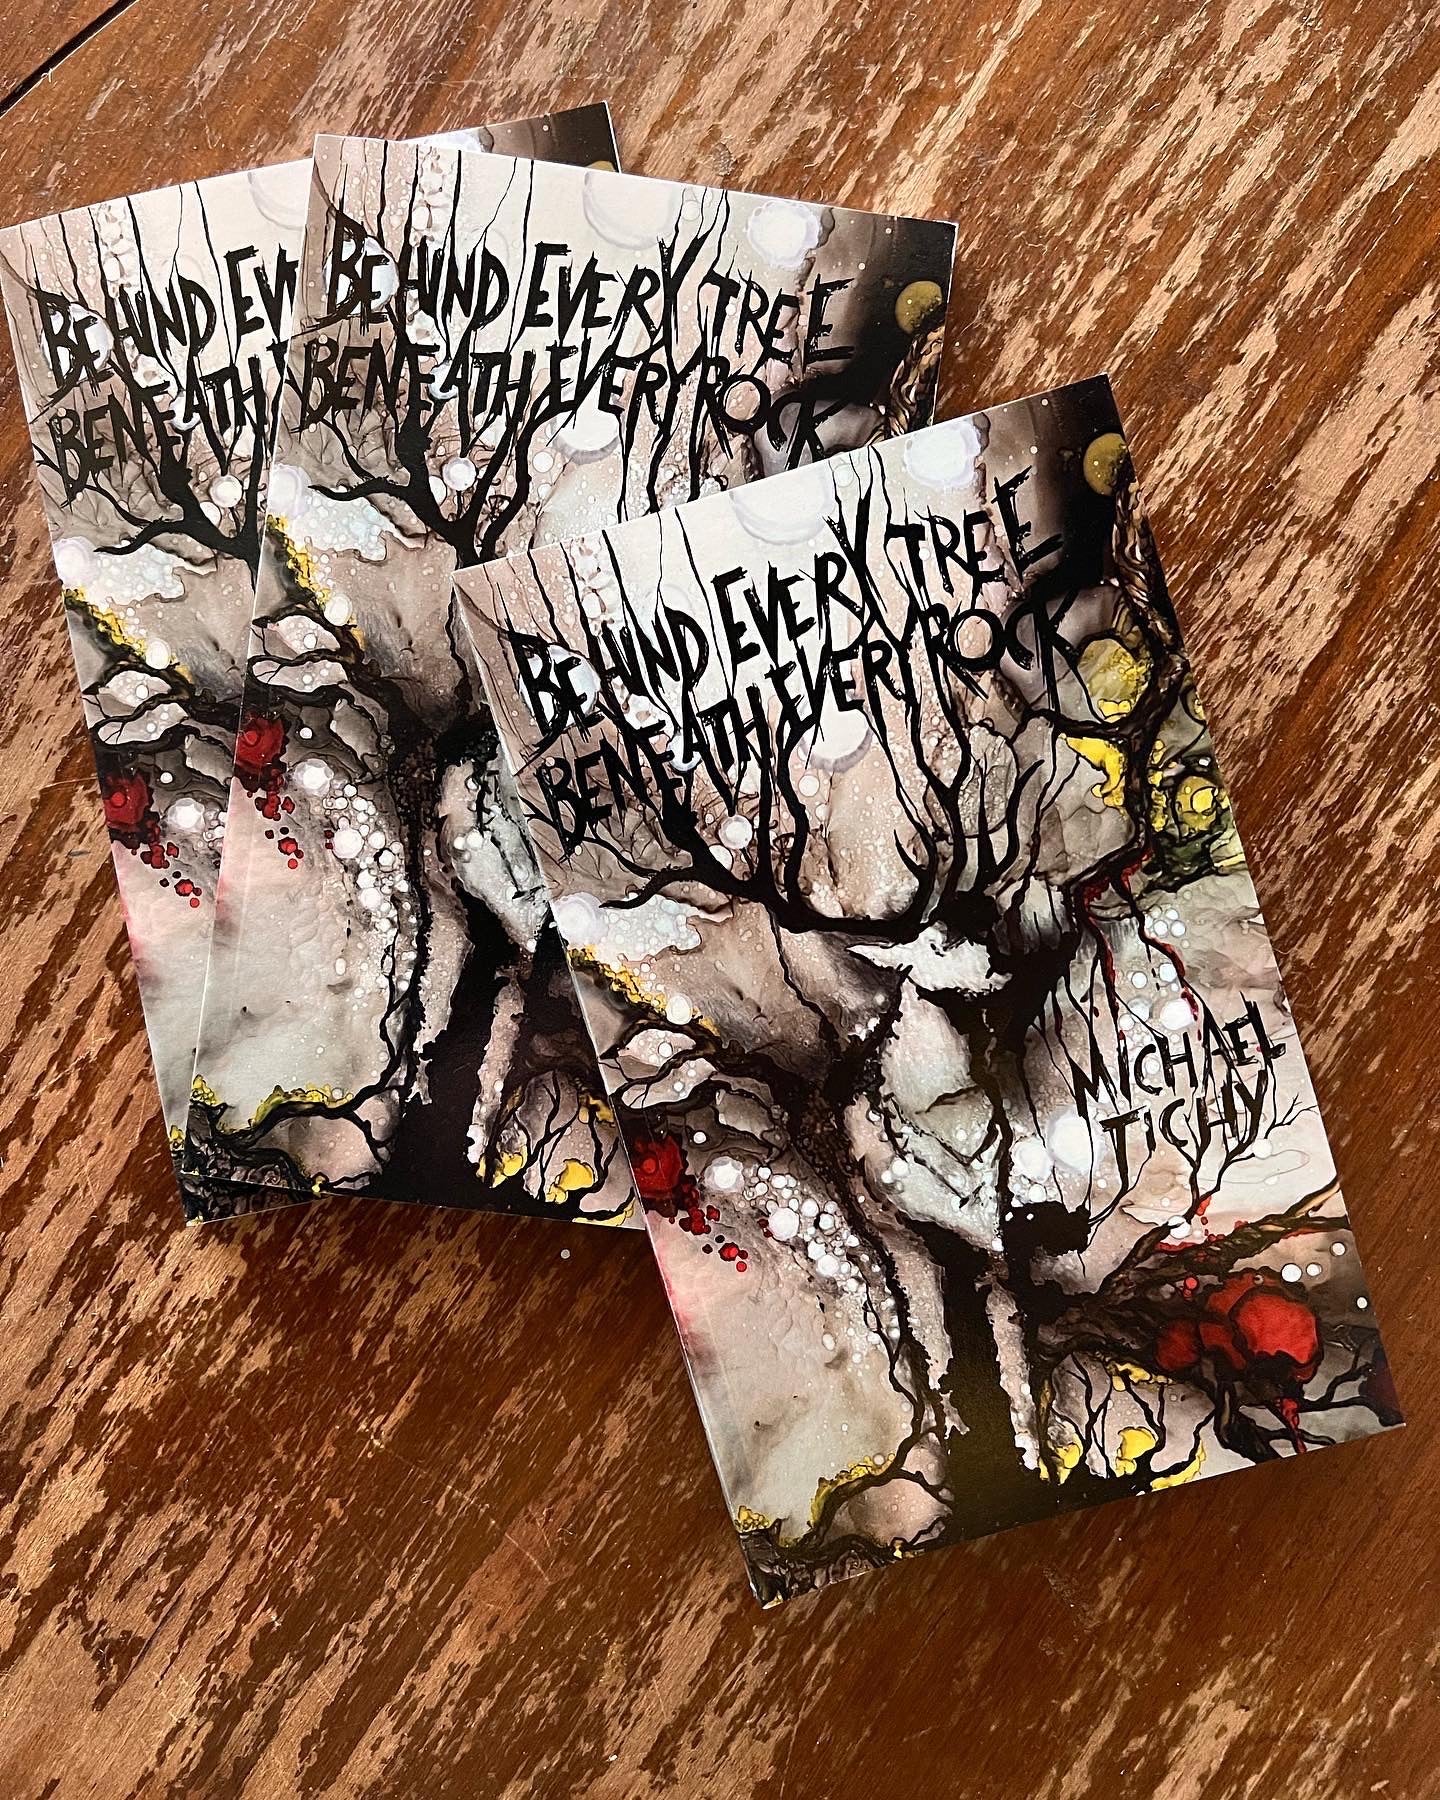 Behind Every Tree, Beneath Every Rock / Michael Tichy, Castaigne Publishing